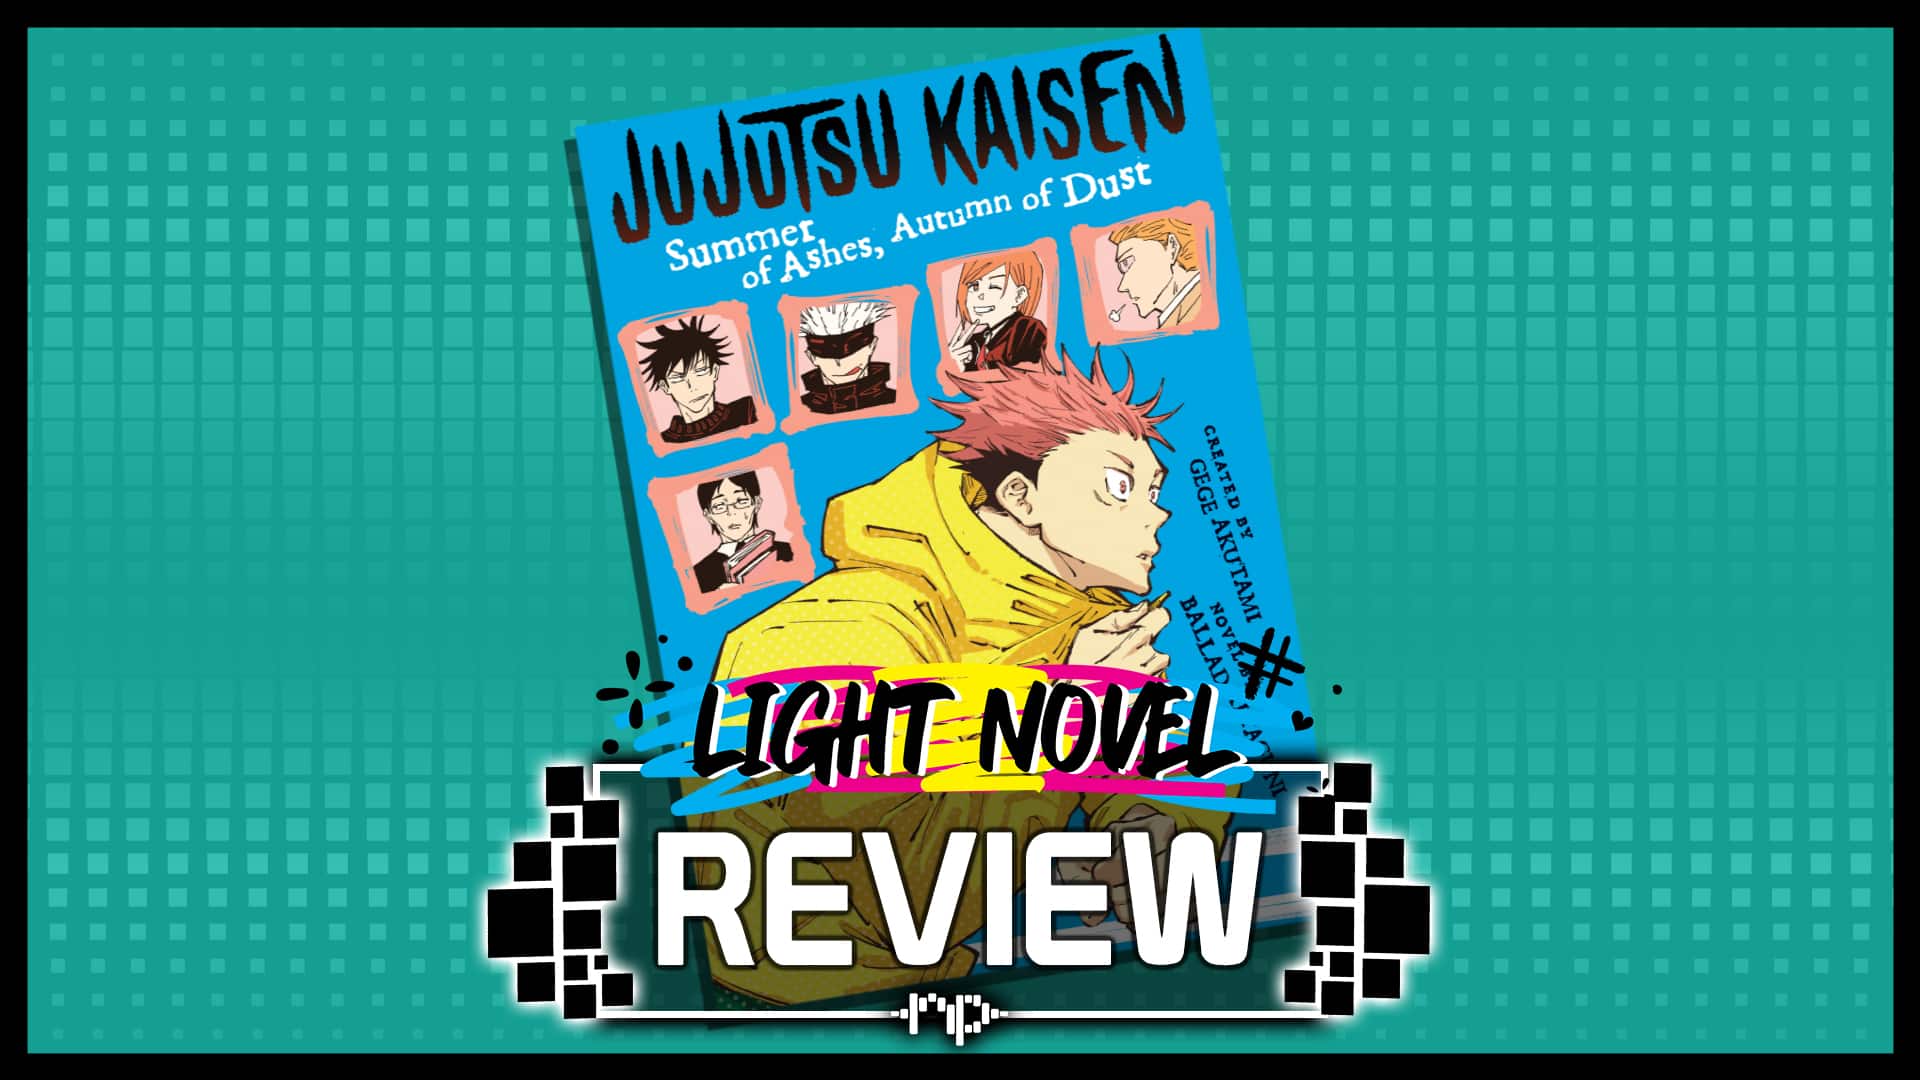 Jujutsu Kaisen: Summer of Ashes Autumn of Dust Review – Getting the Most From These Characters